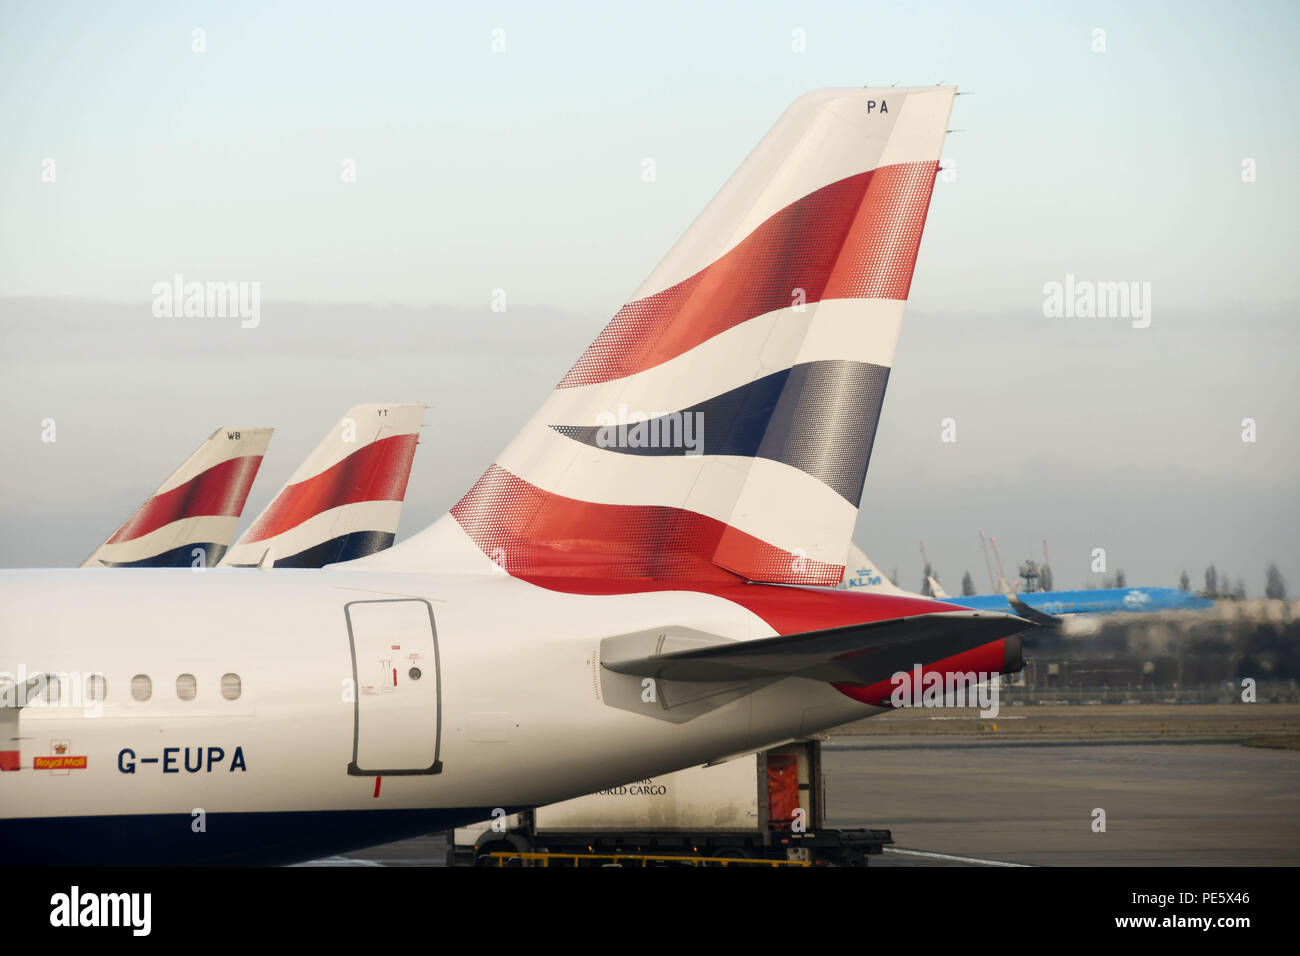 Row of tail fins of British Airways Airbus jets parked outside Terminal 5 at London Heathrow Airport Stock Photo